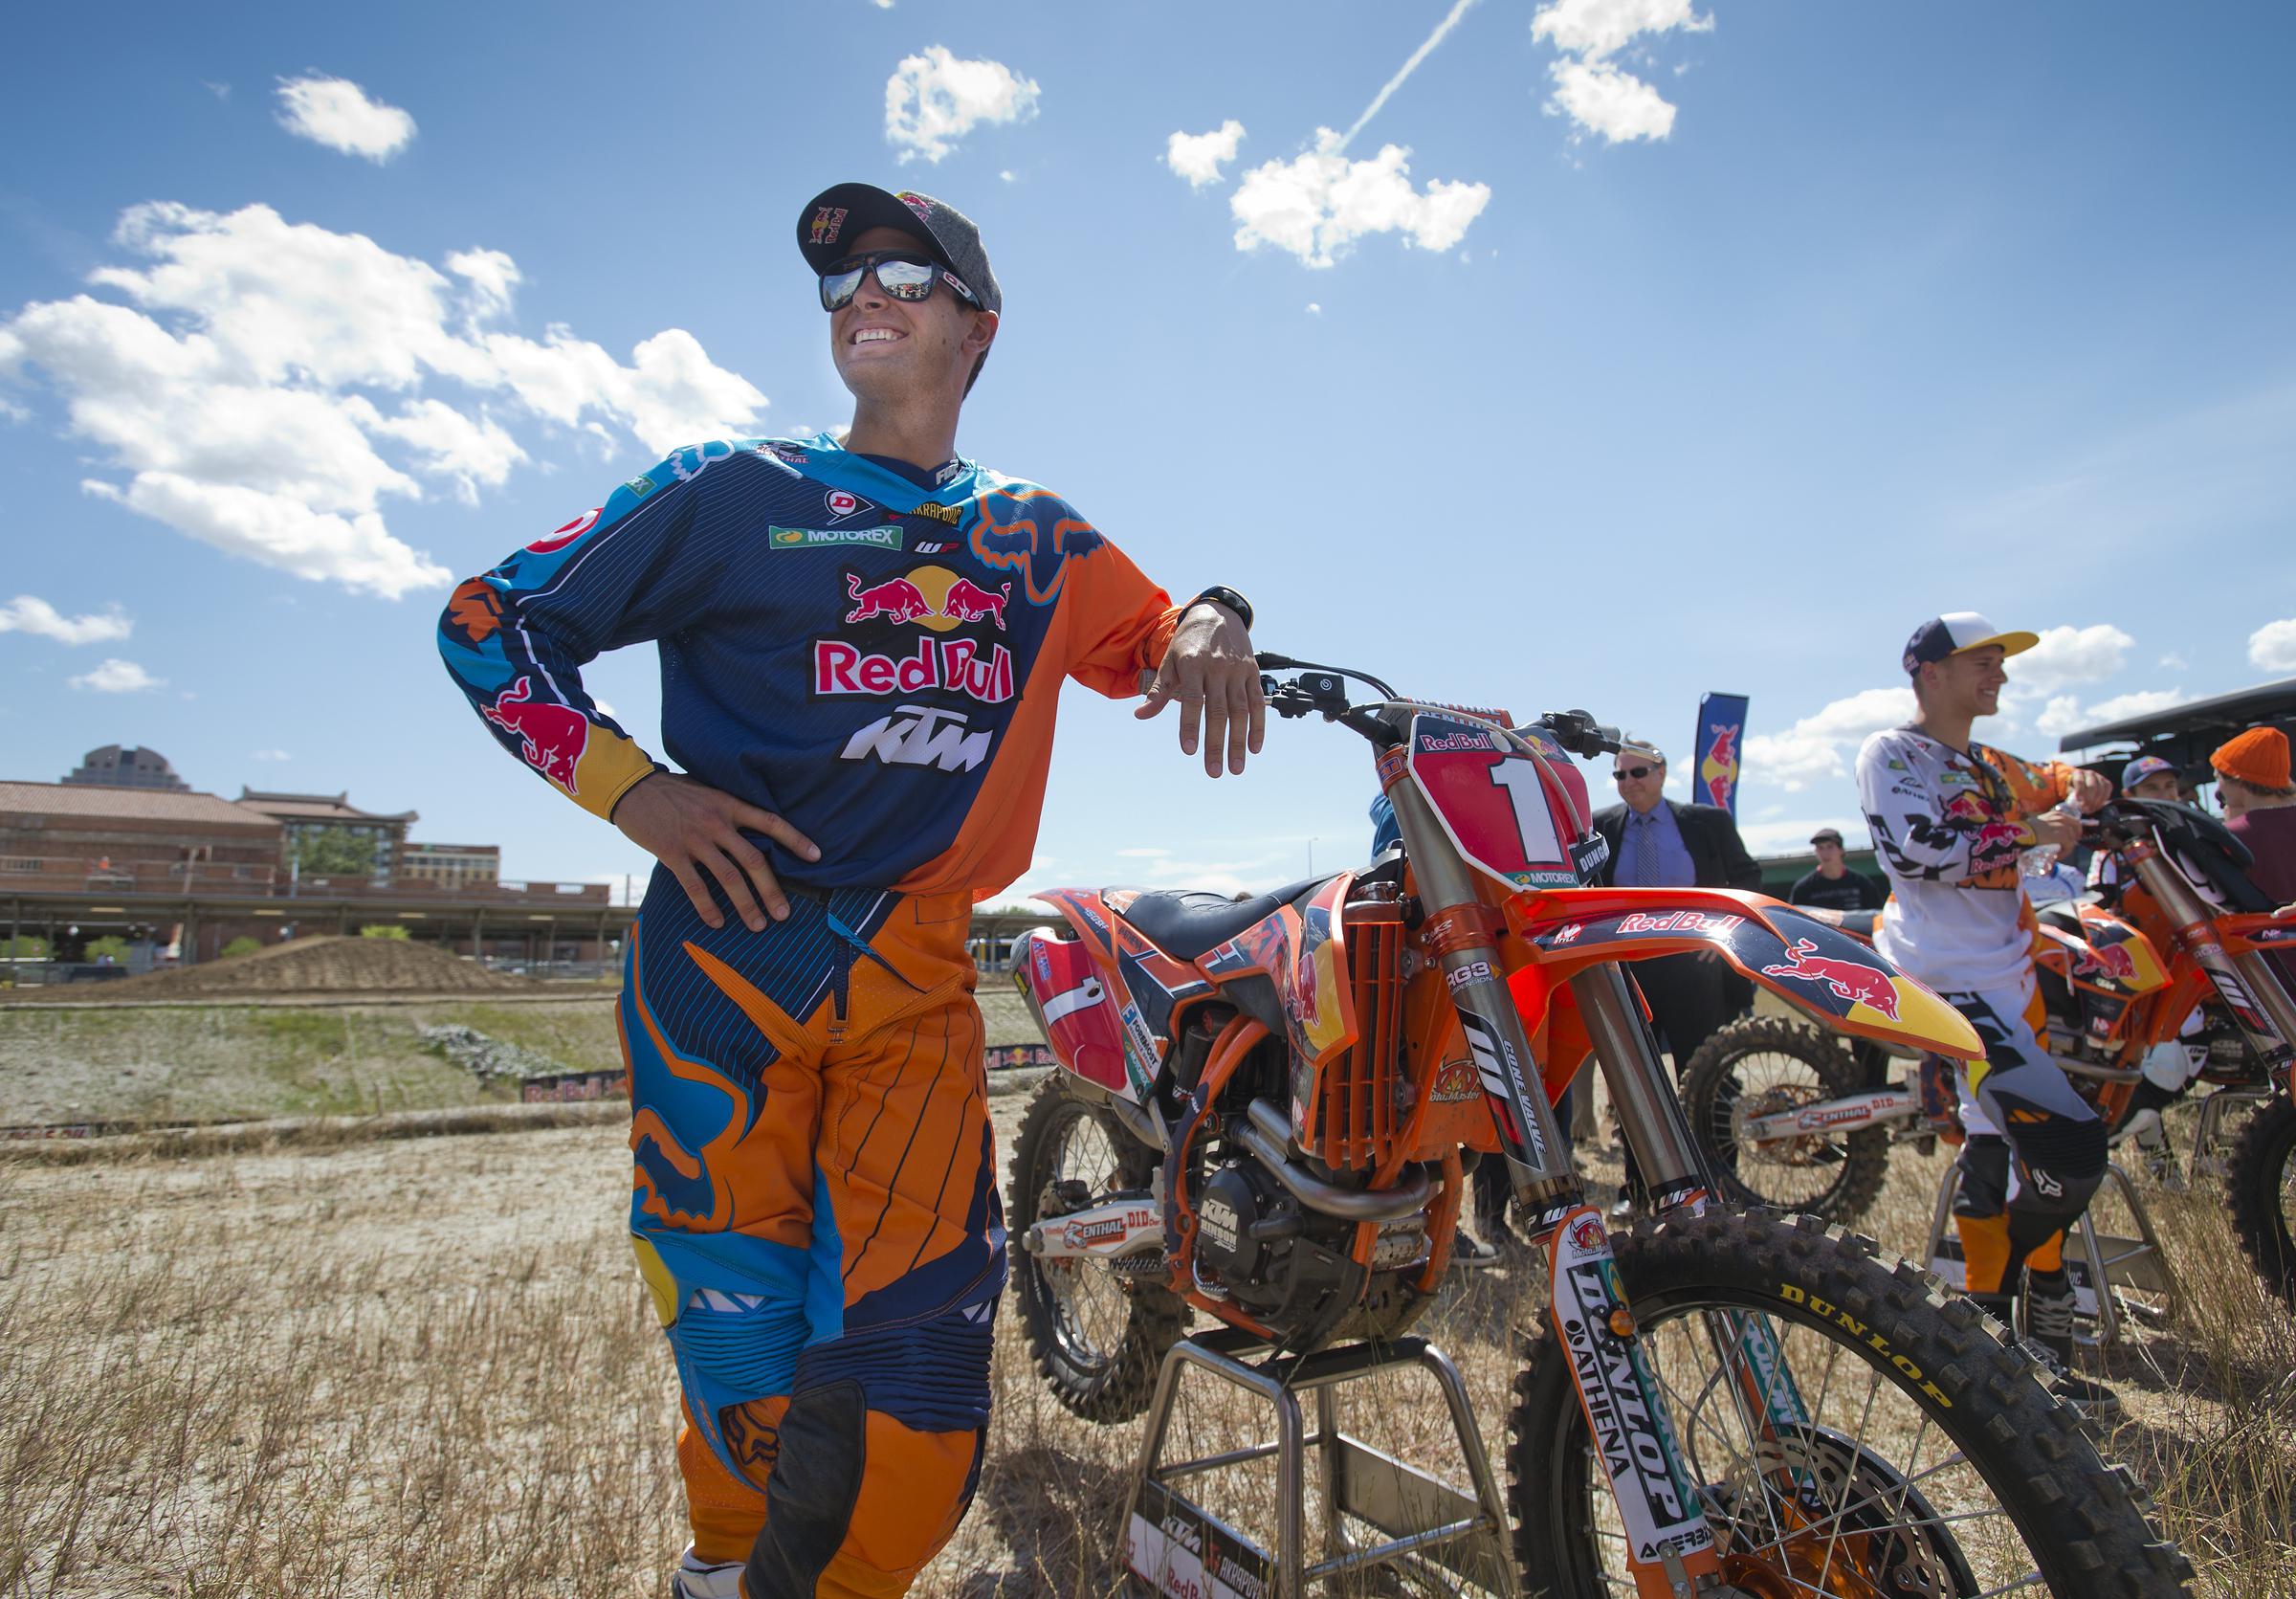 Motocross fitness: Why motocross is so good for you